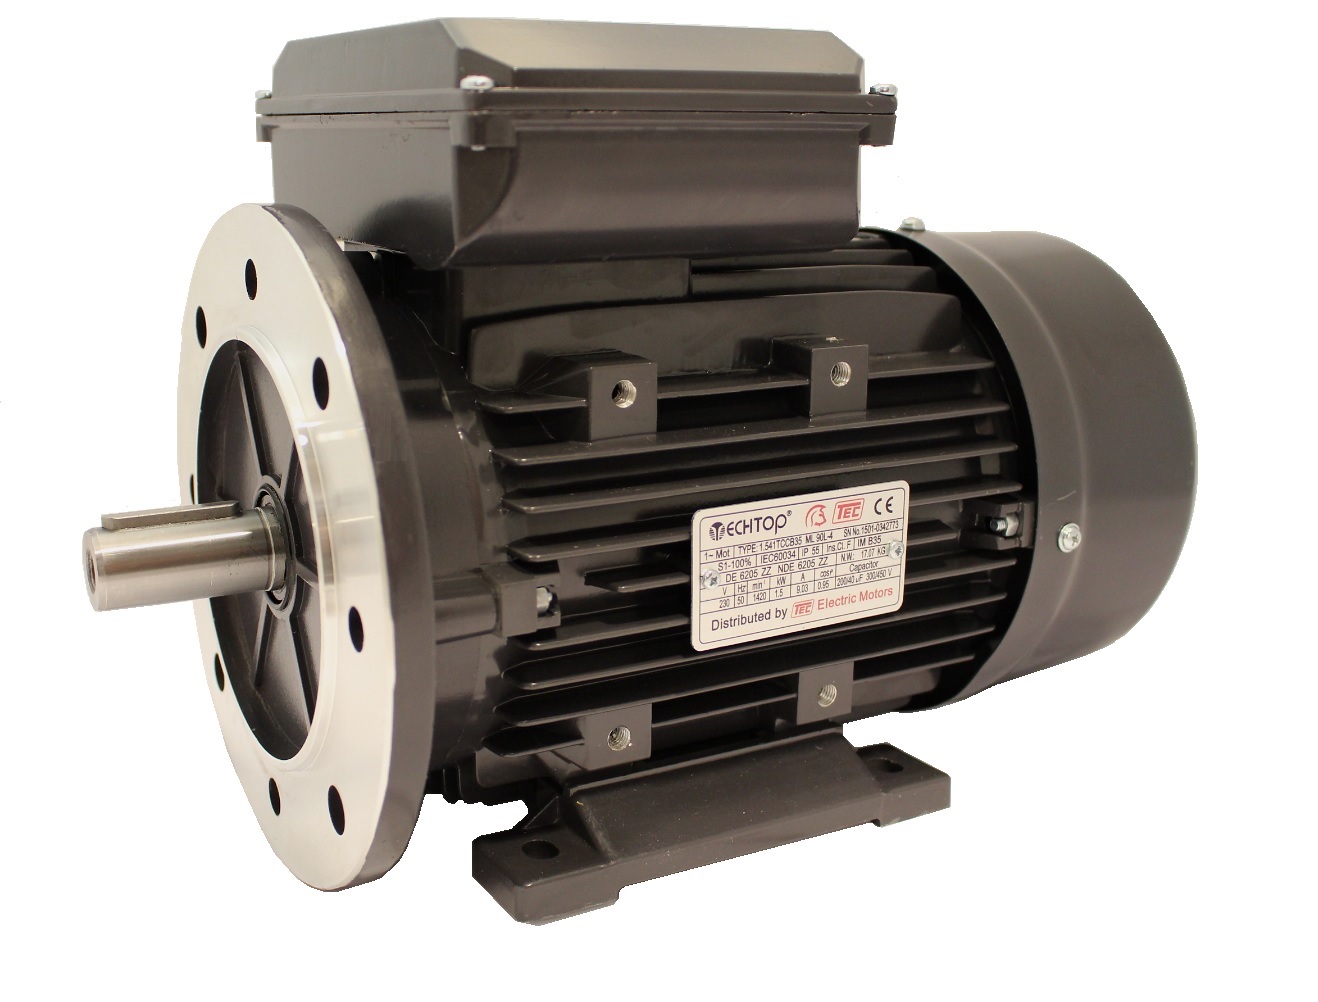 Single Phase 230v Electric Motor, Perm/Cap, 0.55Kw 4 Pole 1330rpm with Flange & Foot Mount